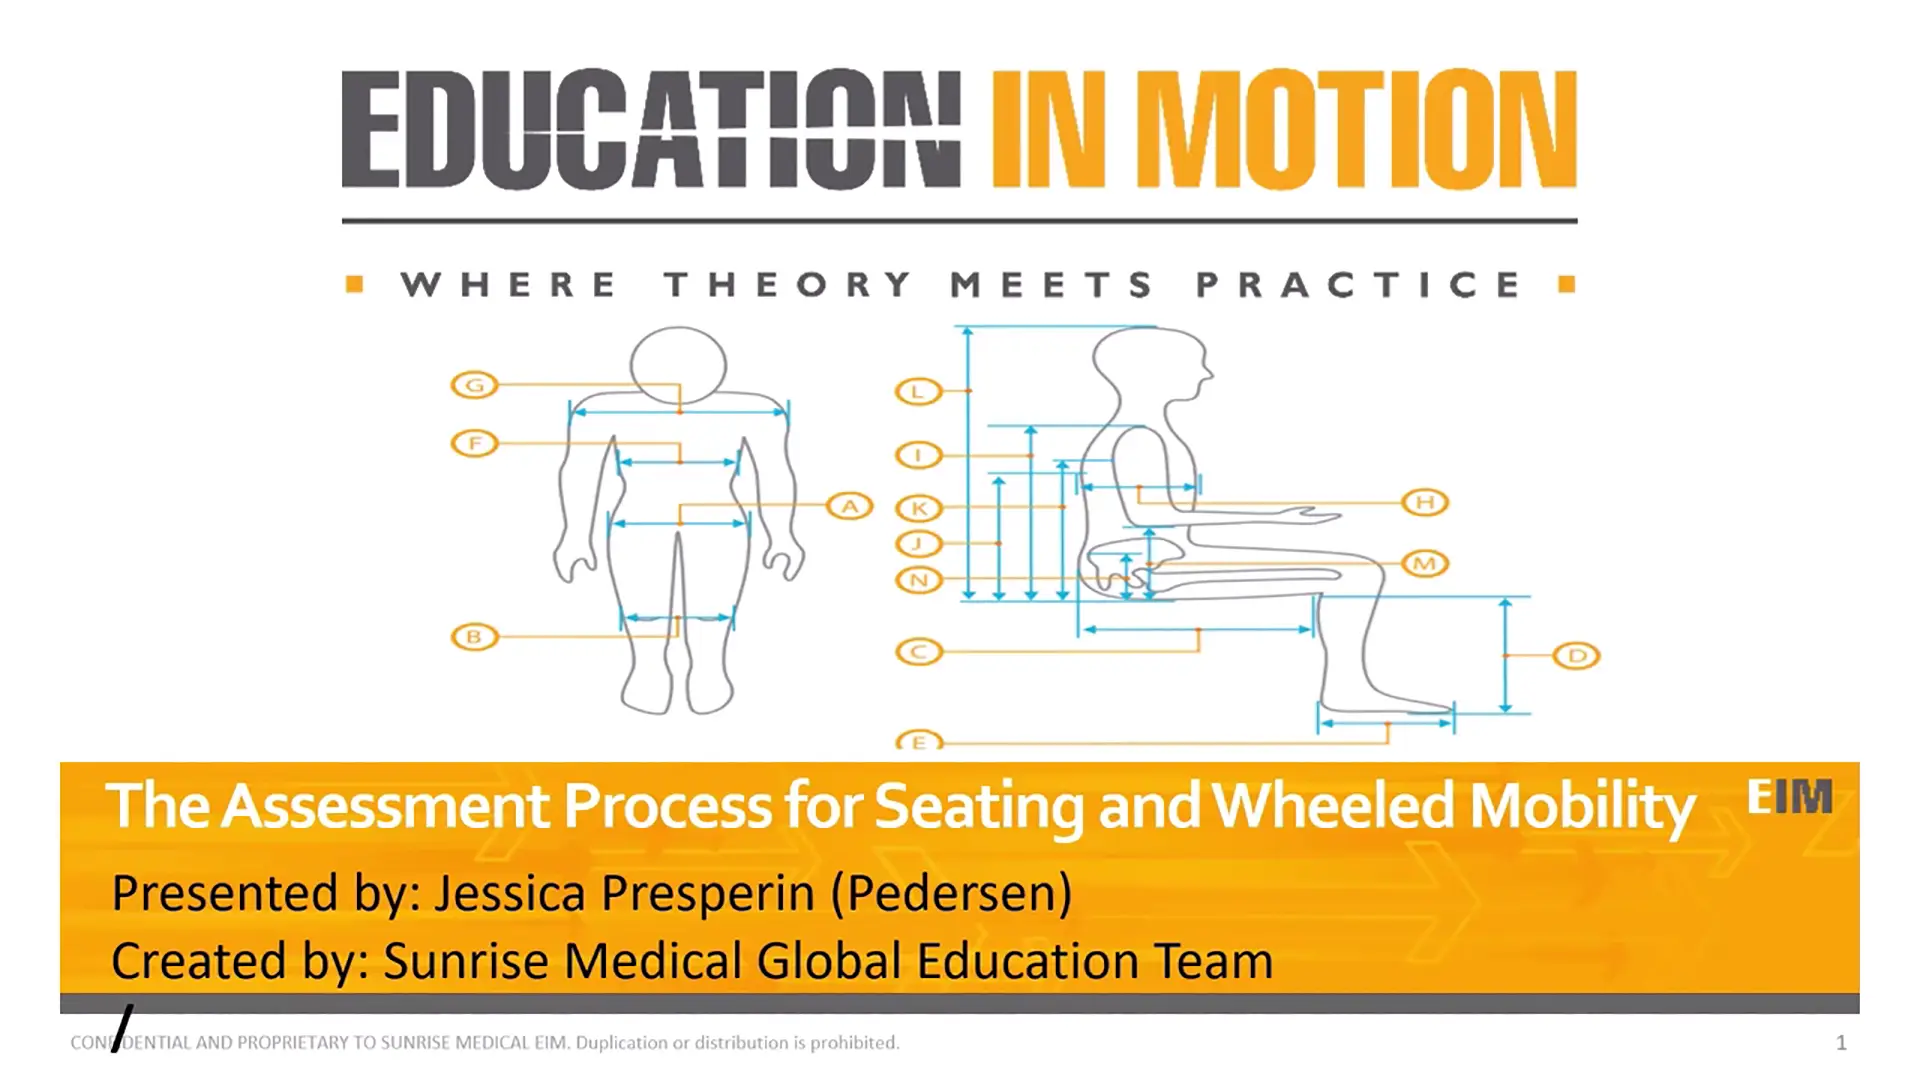 The Assessment Process for Seating and Wheeled Mobility